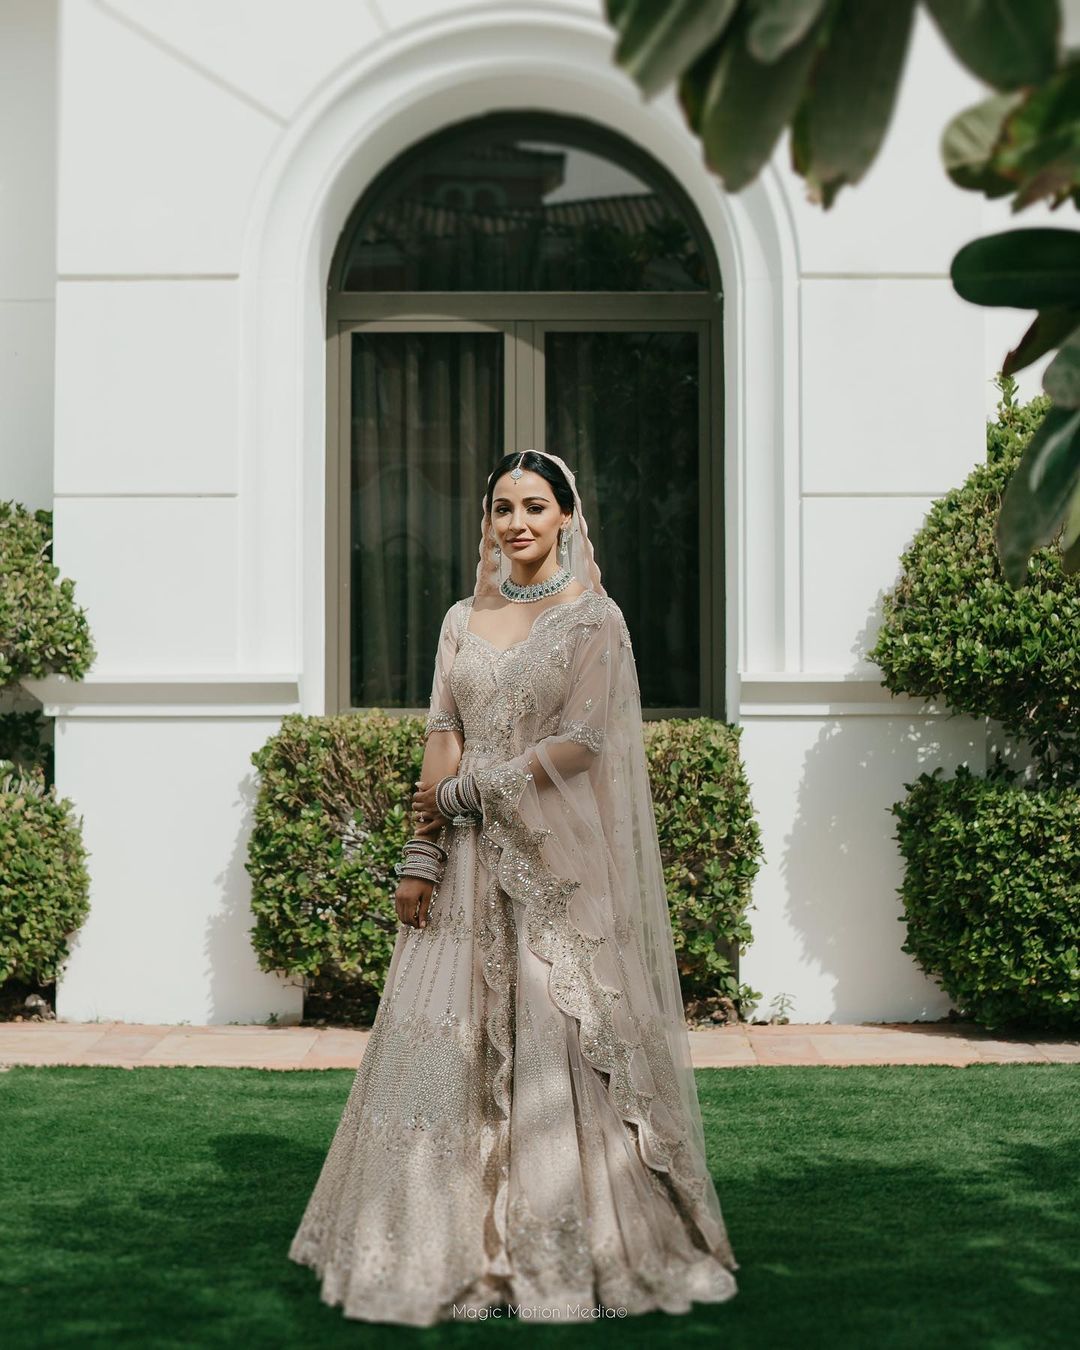 Purity, Peace And Calmness With Beauty Simple Neutral Tone Bridal Lehenga Designs That Are Trending